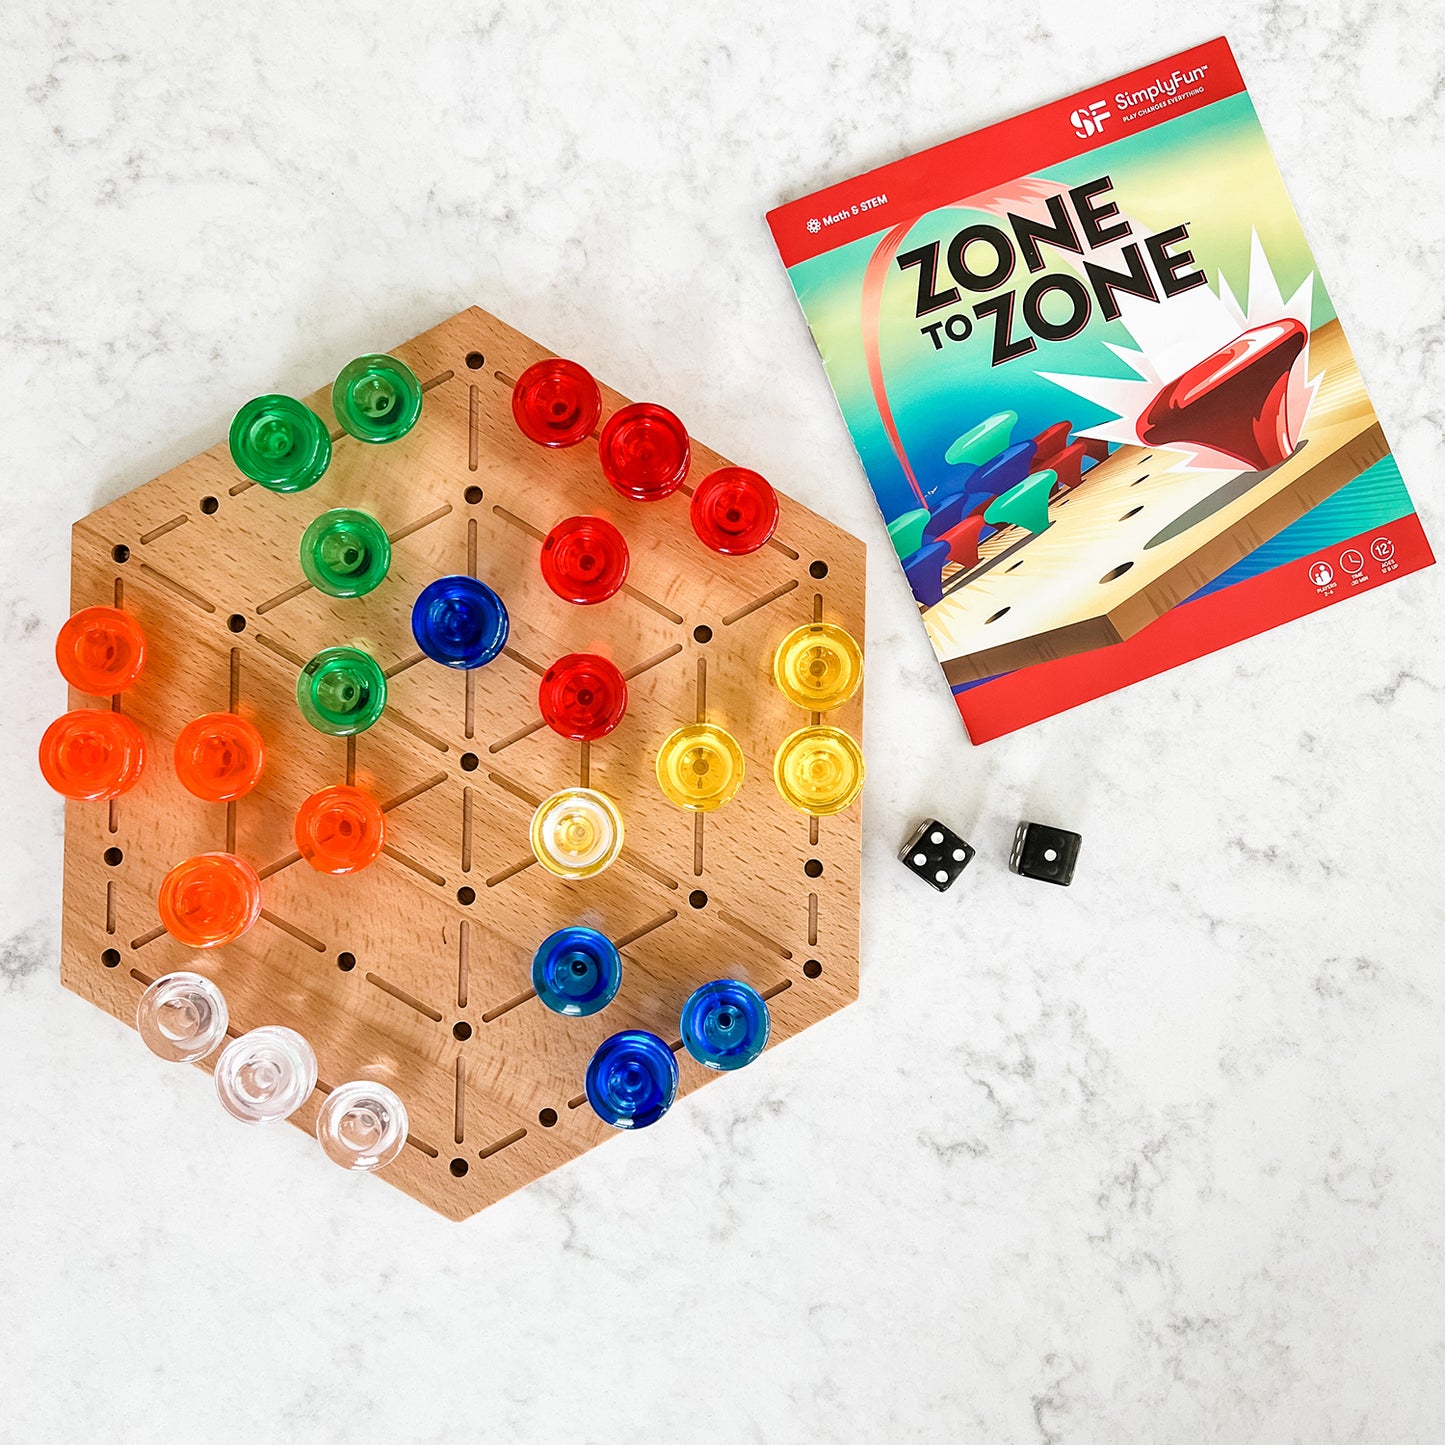 Zone to Zone by SimplyFun is a fun spatial reasoning and probability game featuring a wooden board.